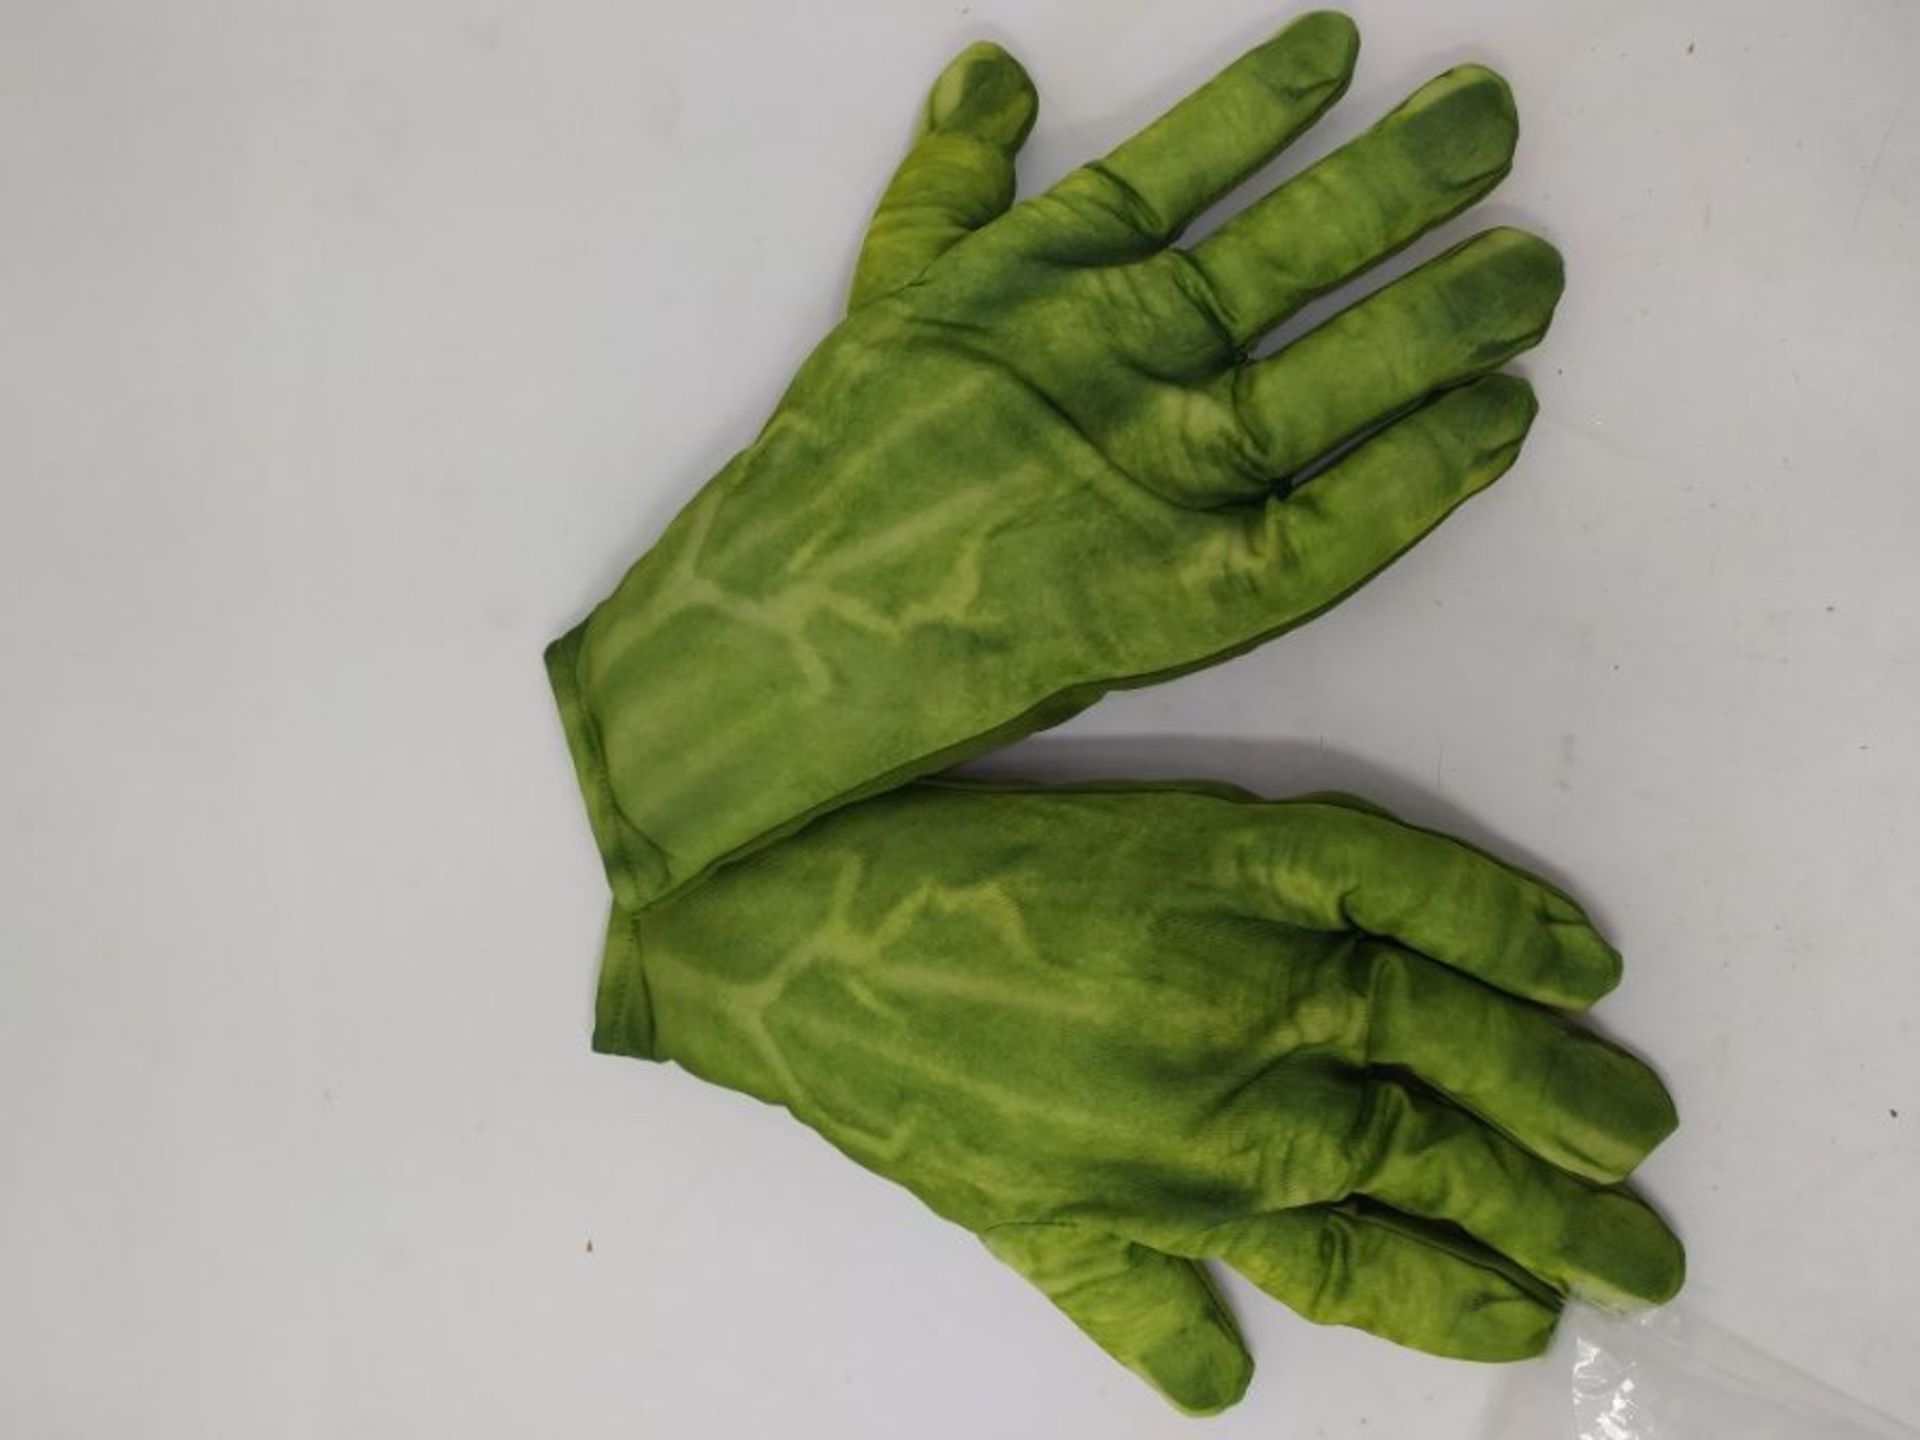 Rubie's 36348_NS Avengers 2 Age of Ultron Child's Hulk Gloves Party Supplies, Hands - Image 2 of 2